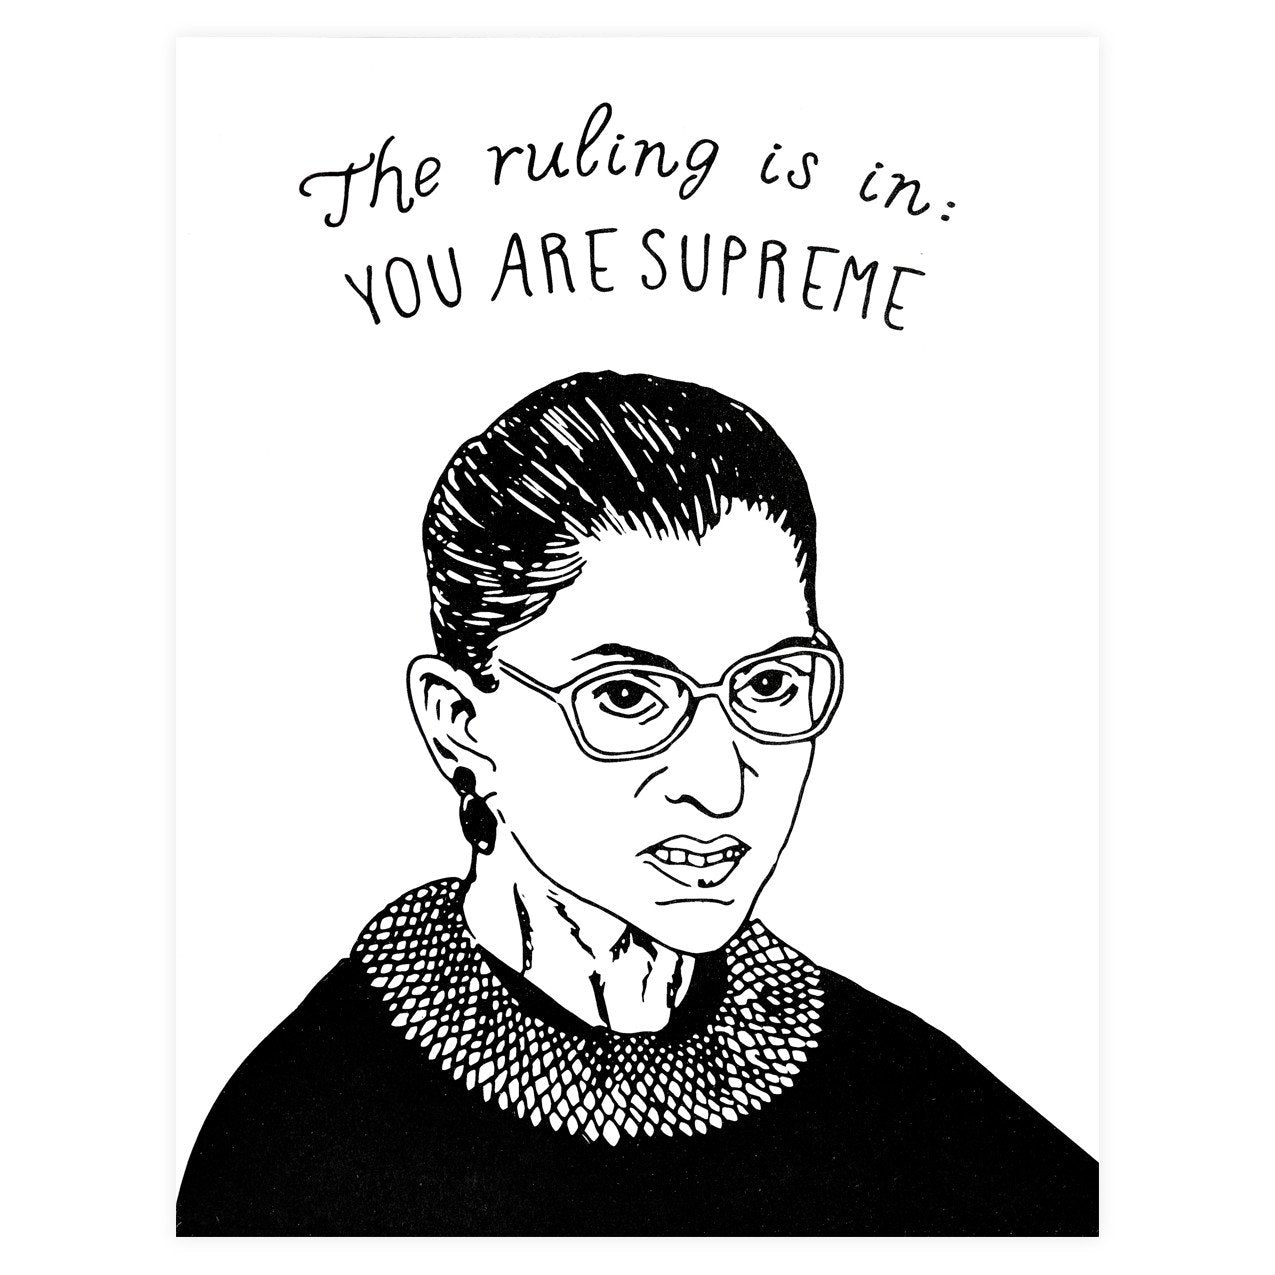 Party of One Paper Ruth Bader Ginsburg You Are Supreme 